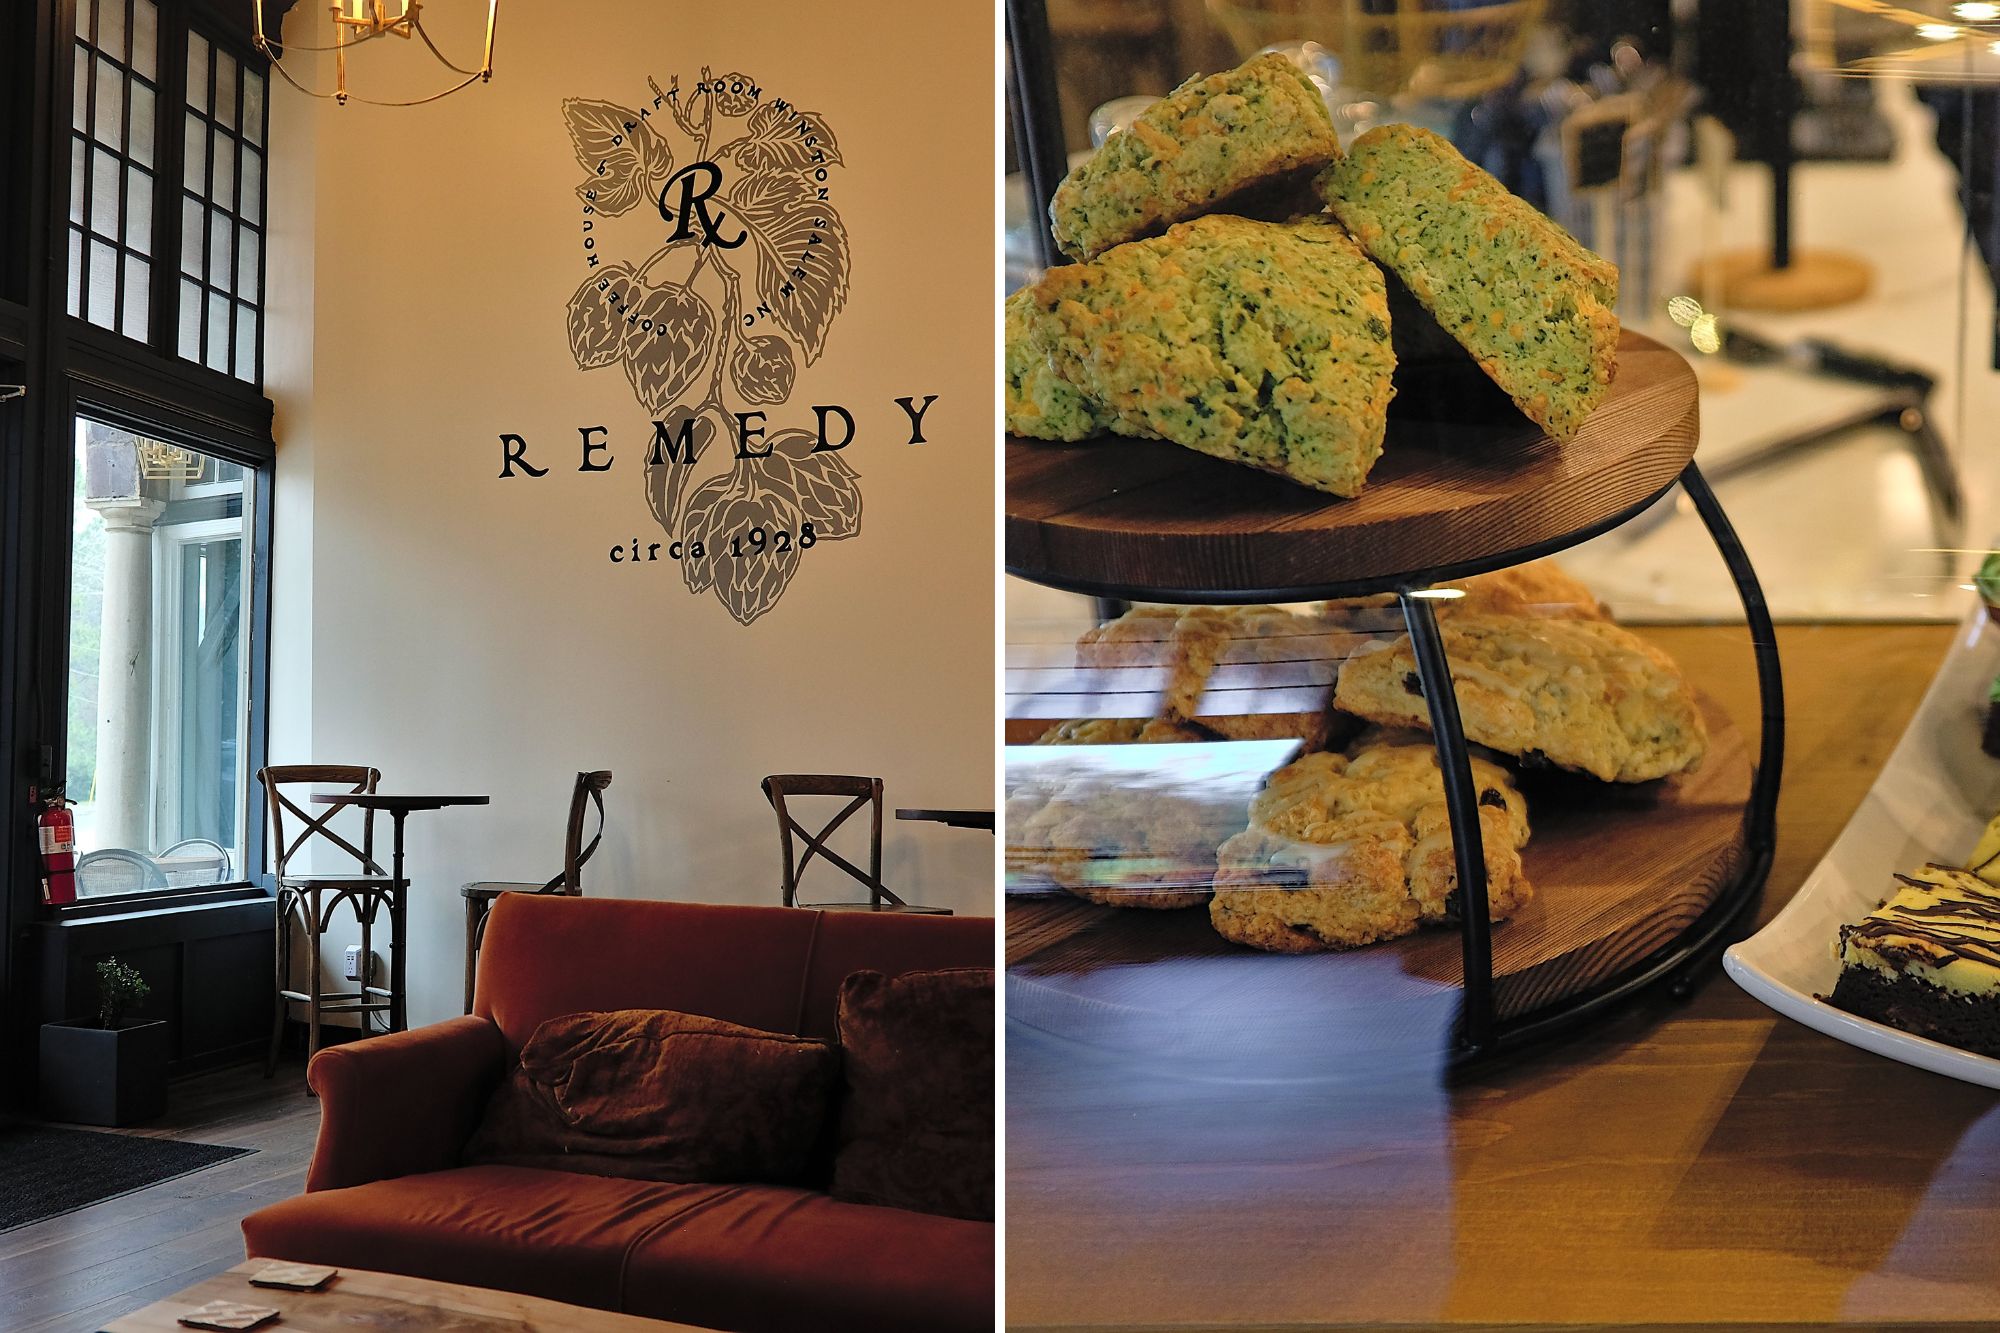 The Remedy Cafe and Bar interior and pastries